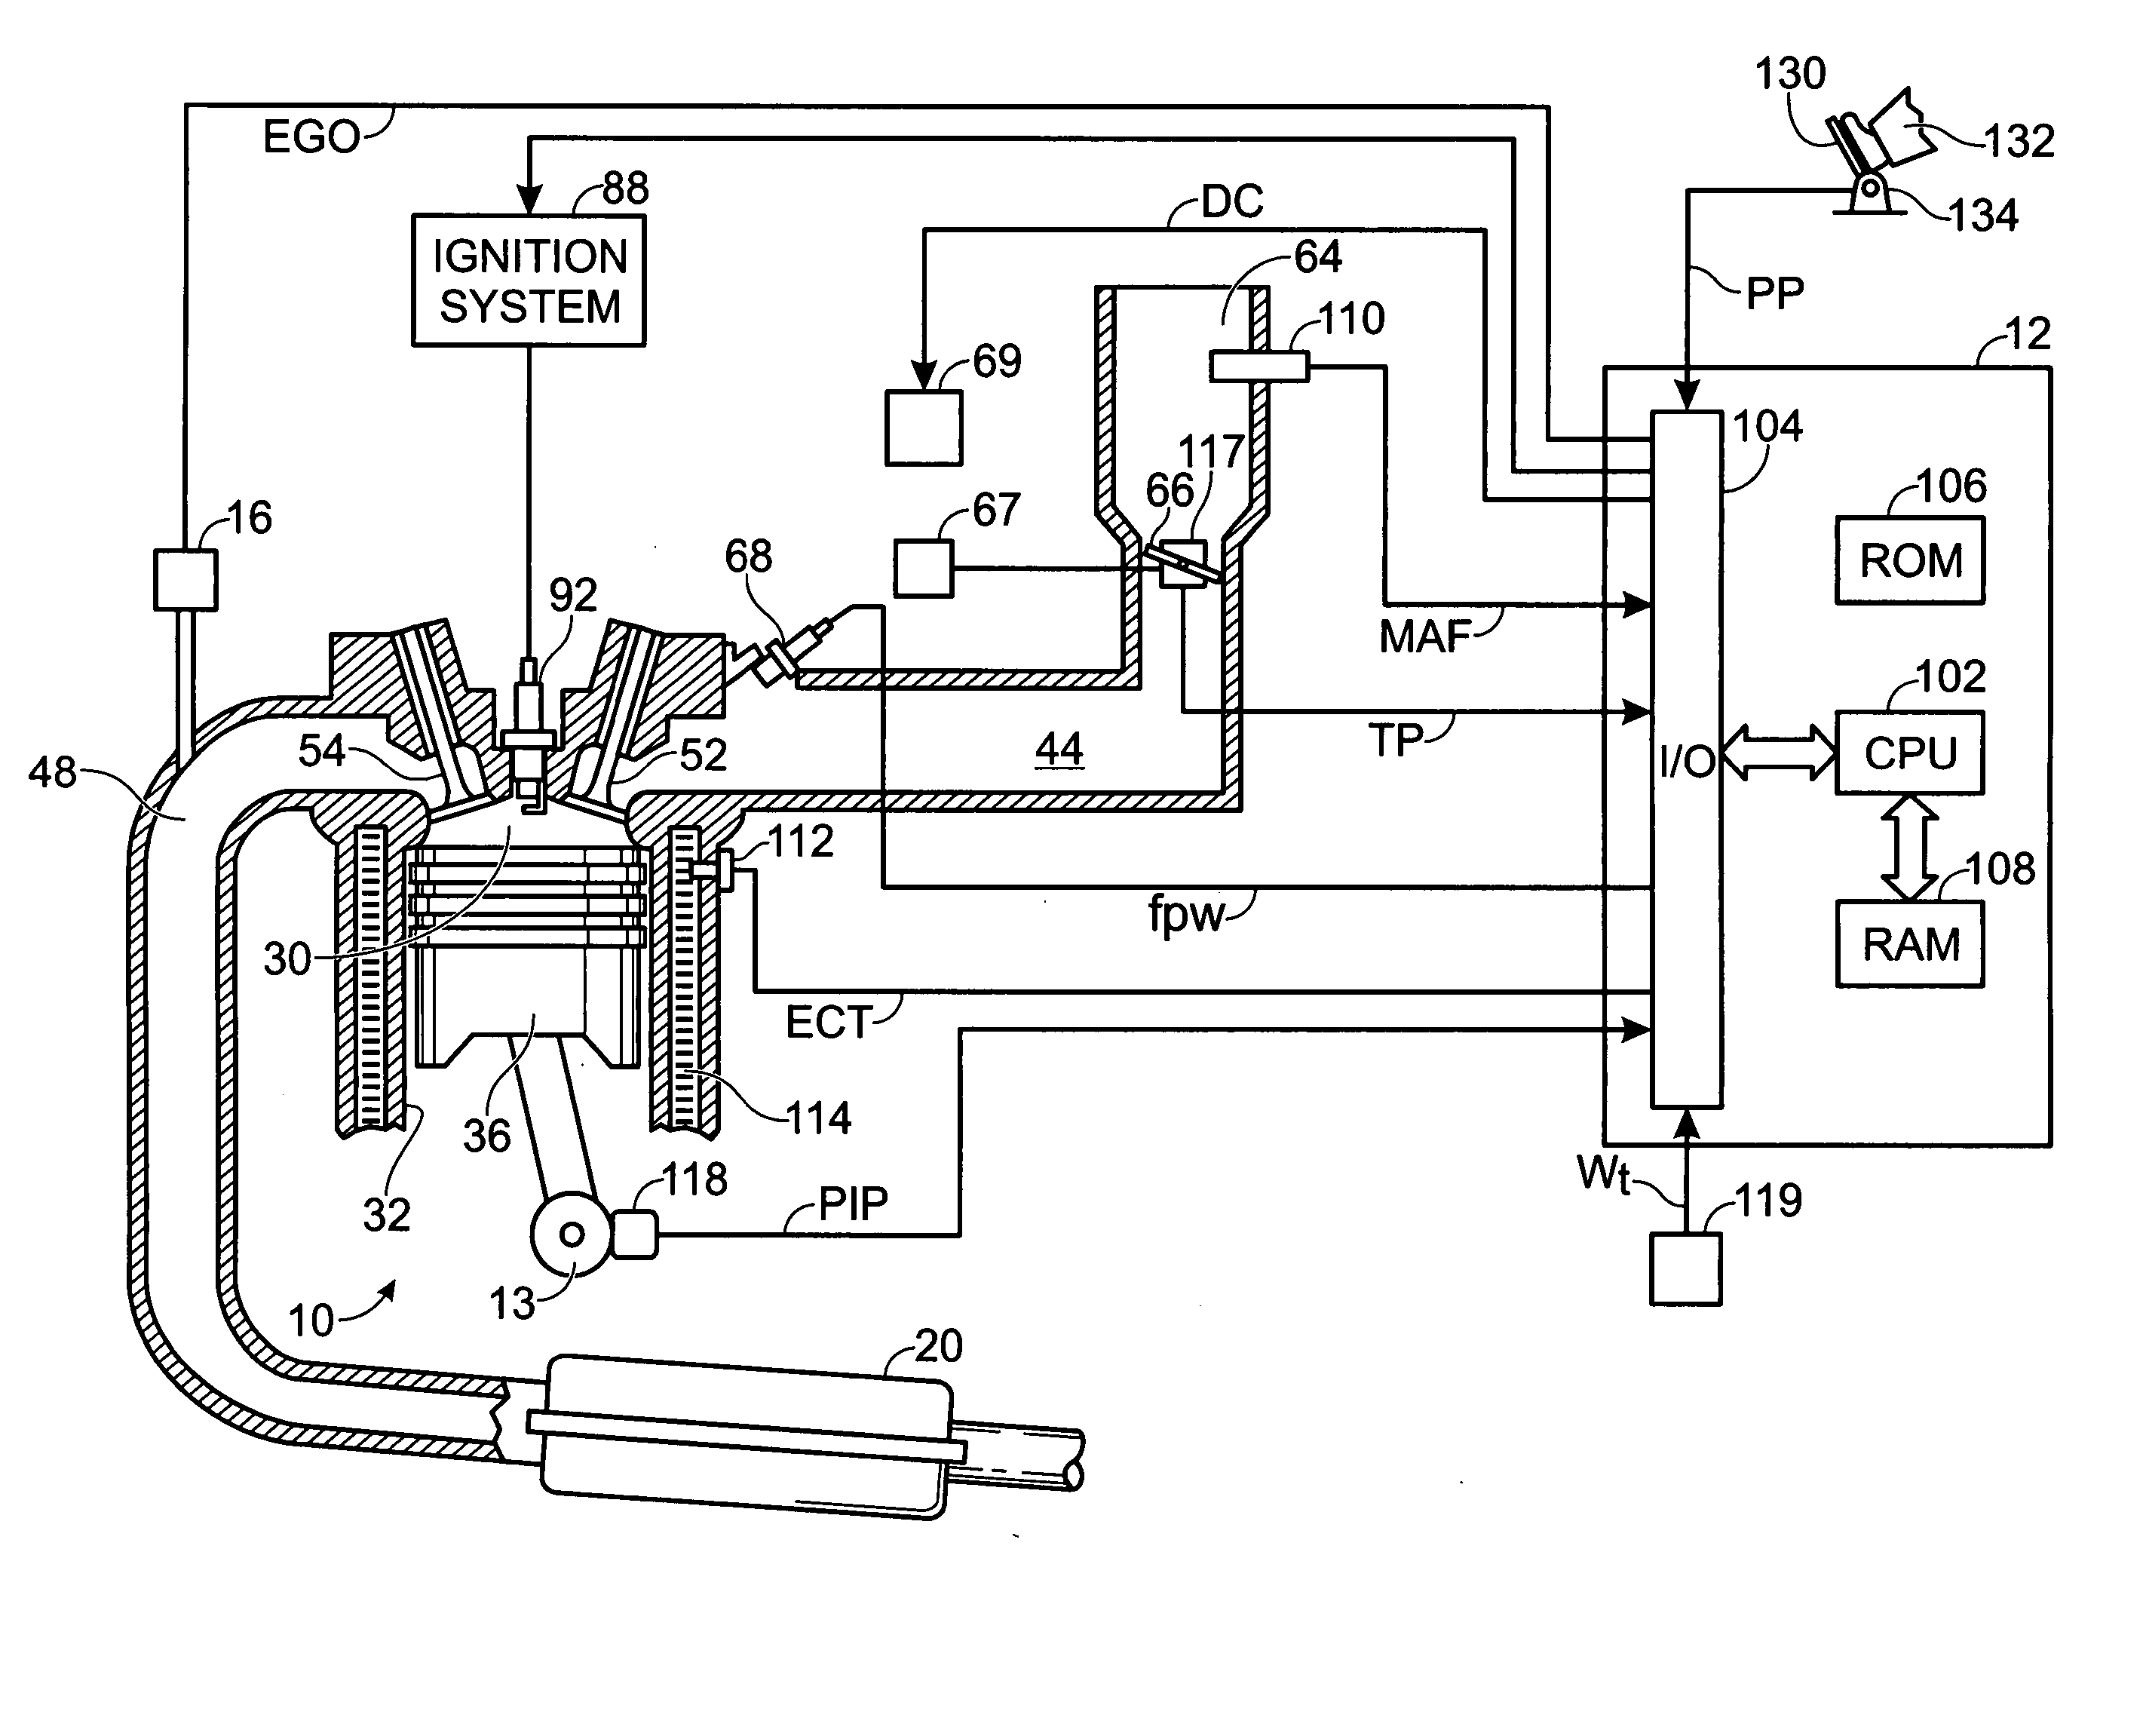 Computer device to calculate emission control device functionality